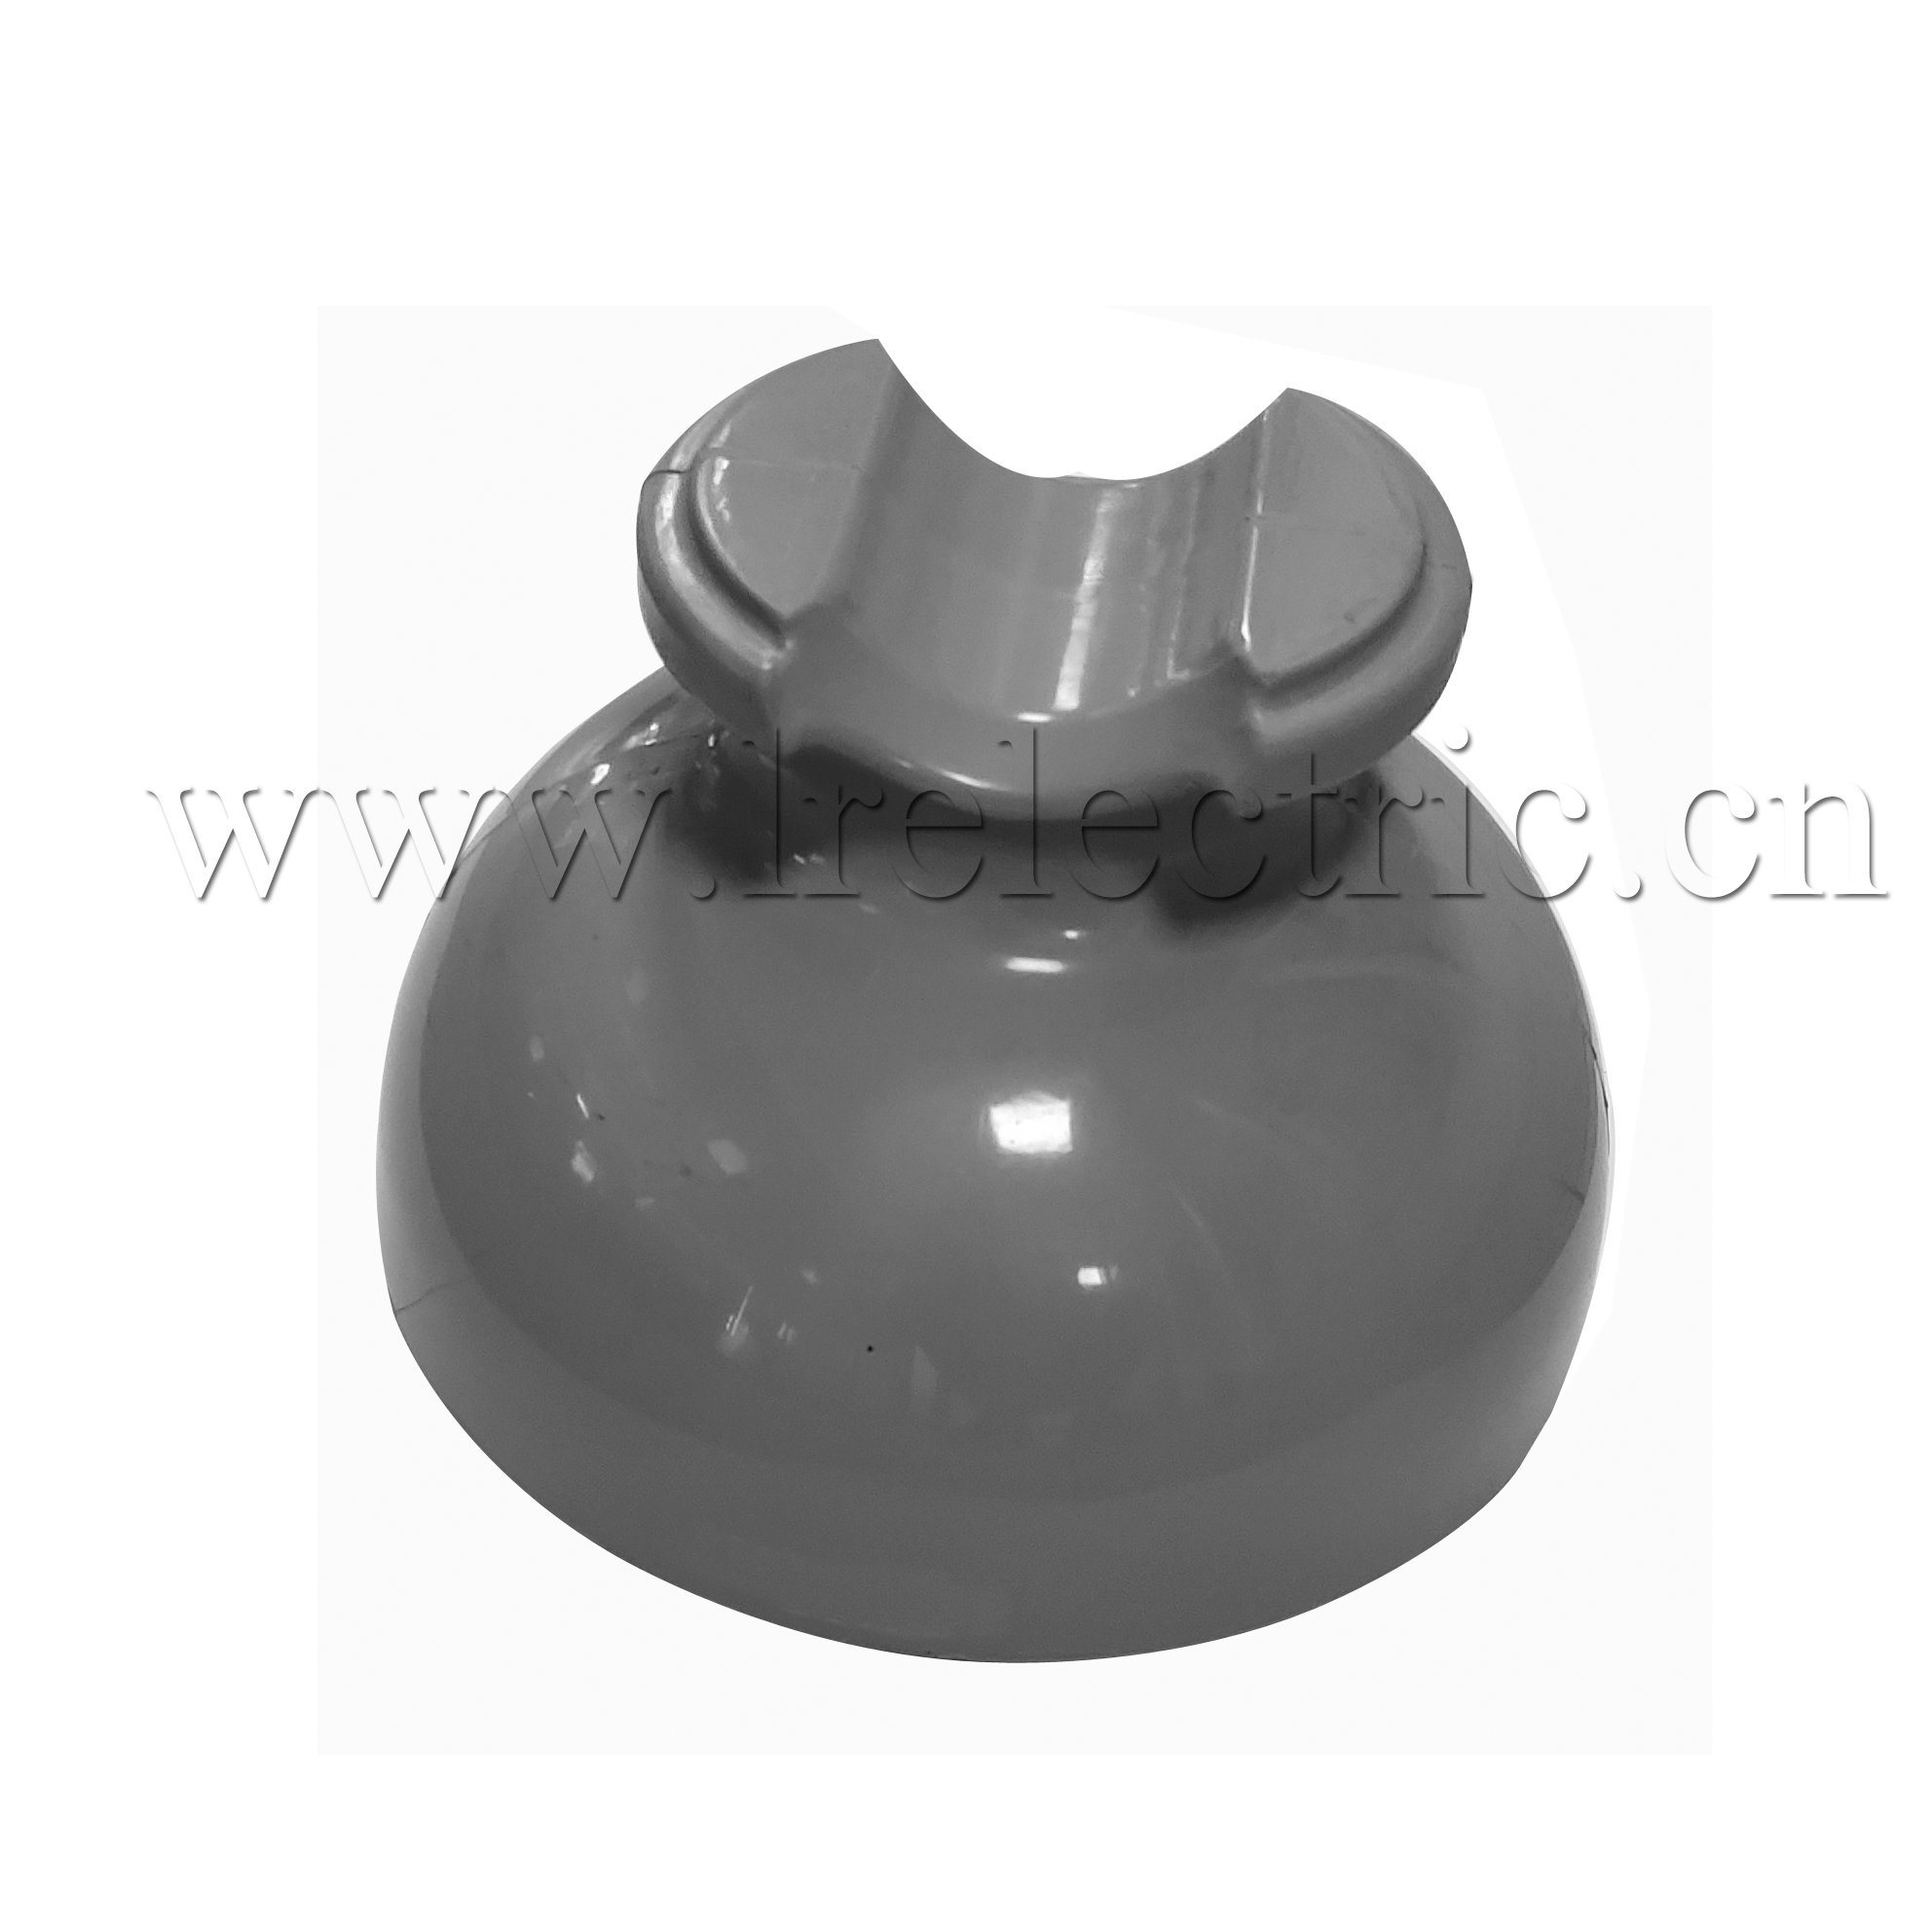 11kv Pin Insulator with Spindle Electrical Ceramic Insulators